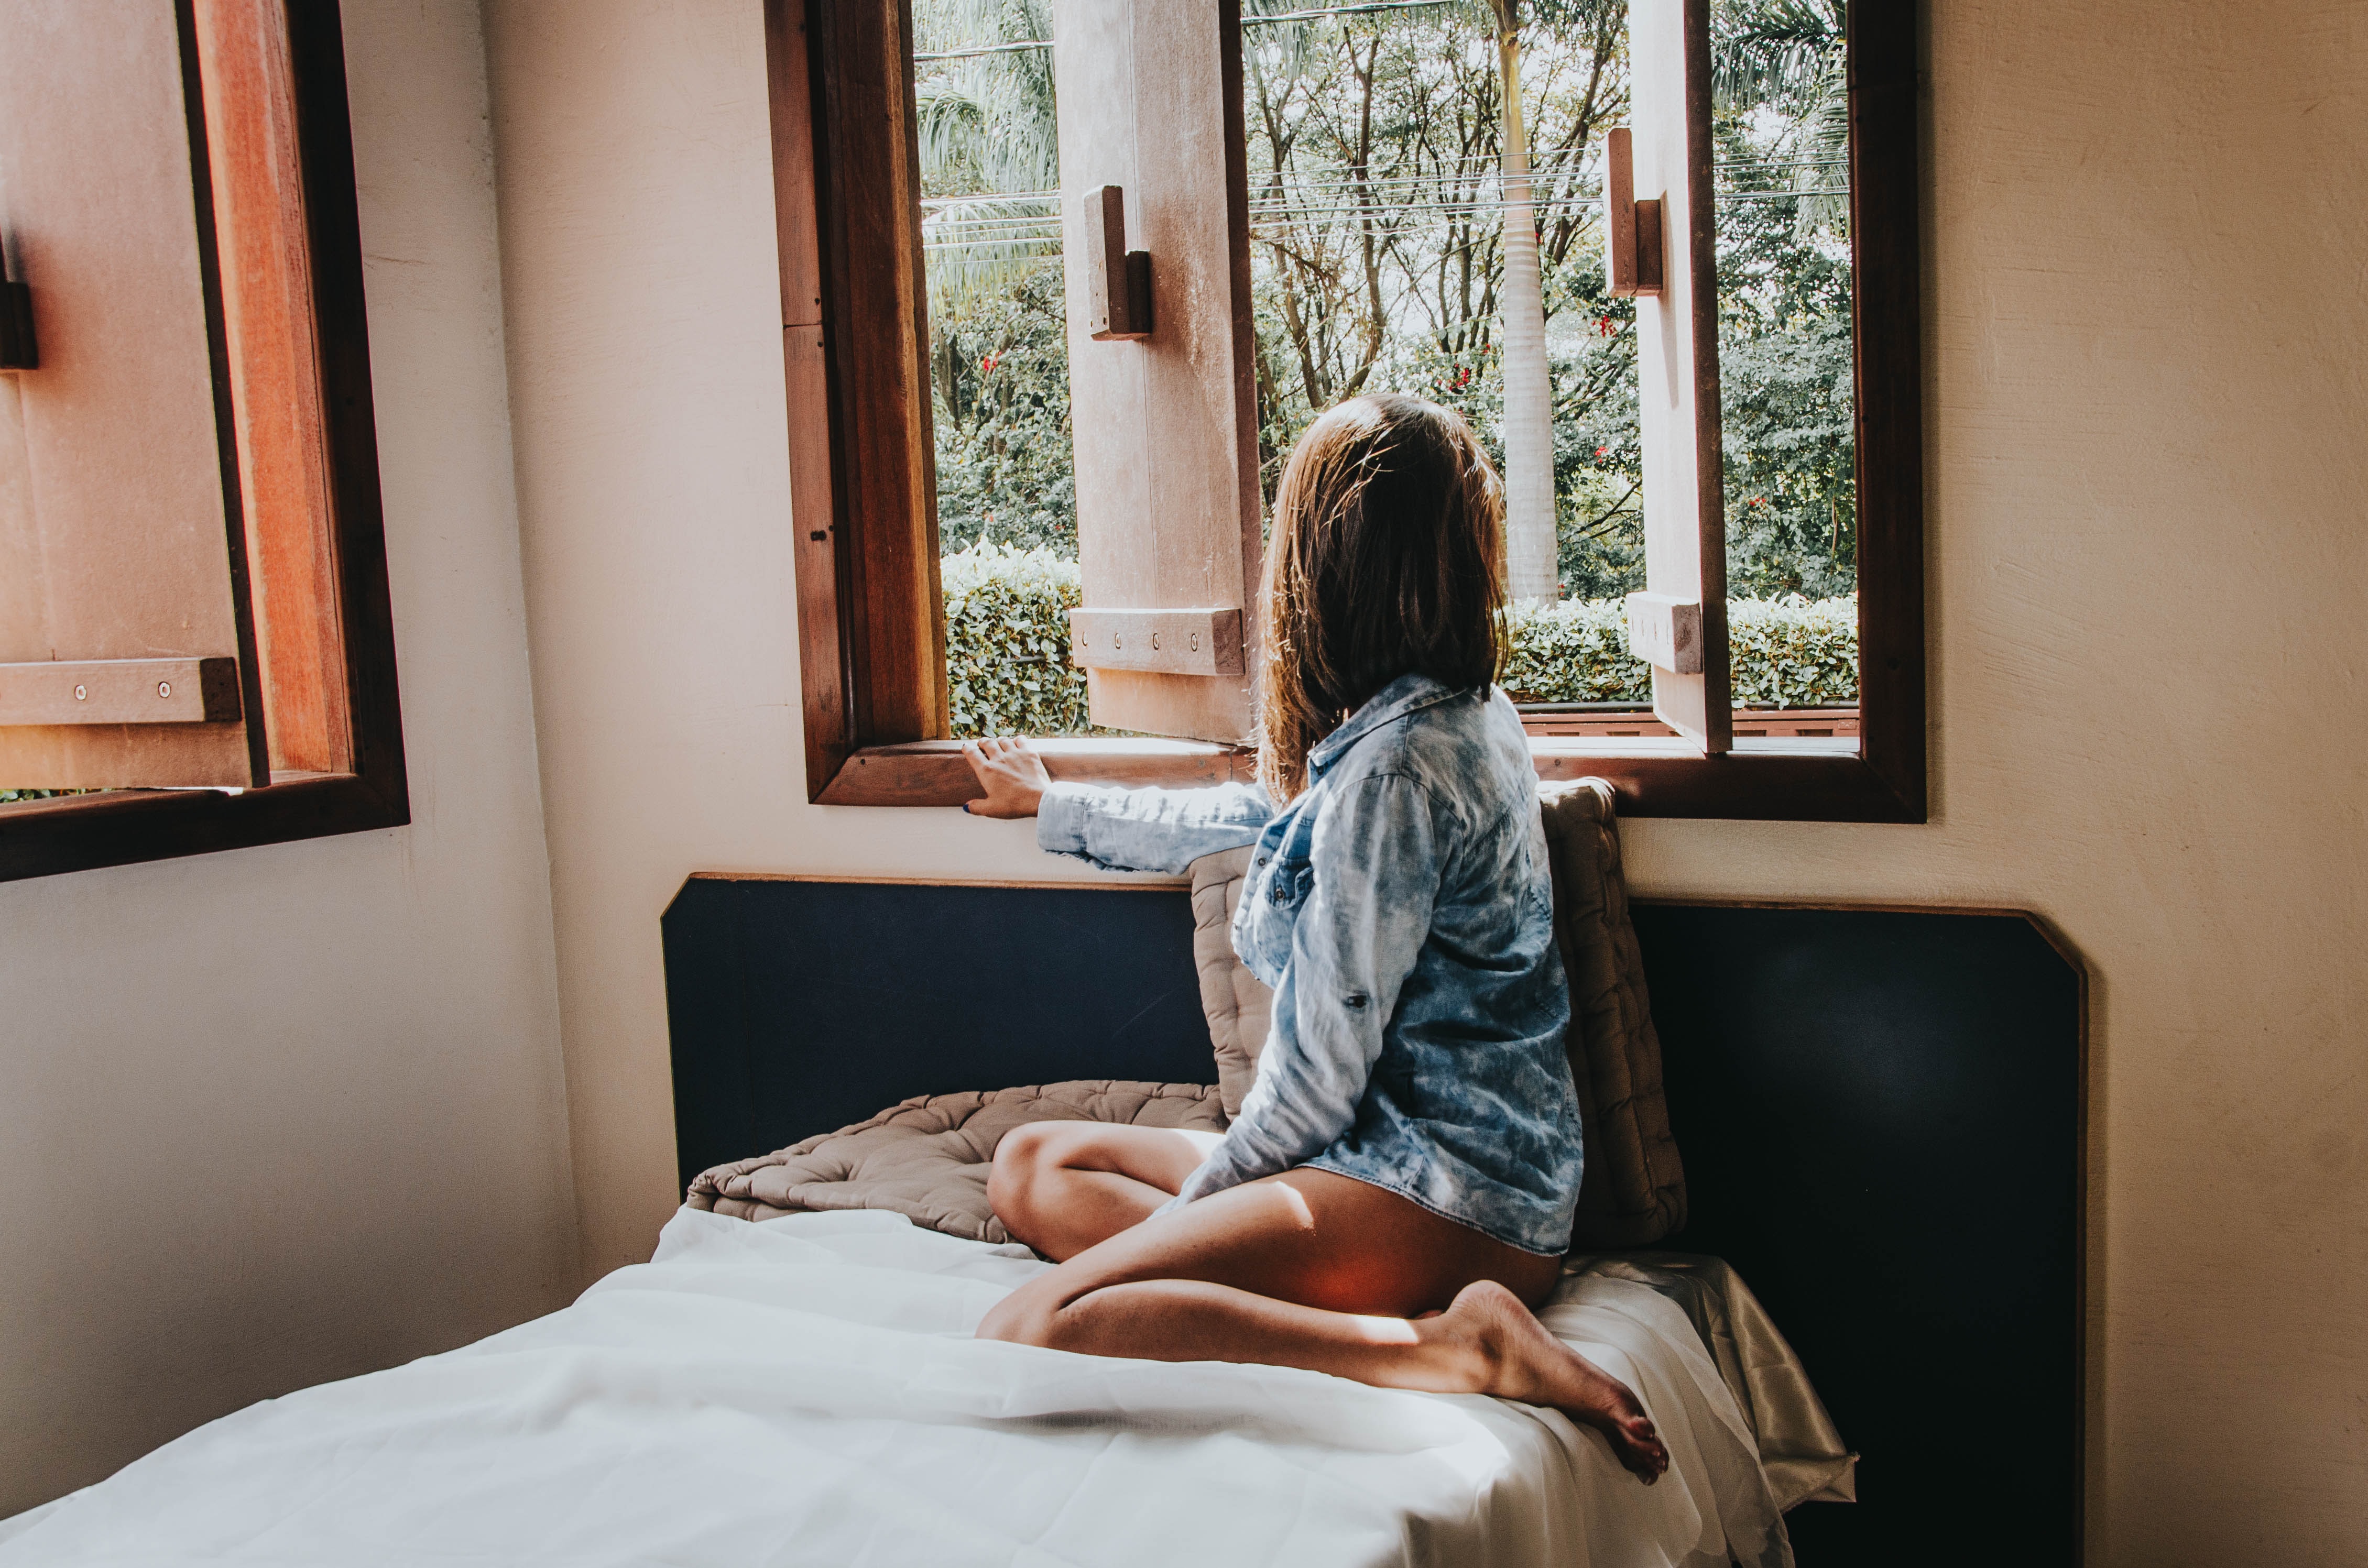 Woman stuck. Утренняя рутина картинки. Morning Routine girl. Women look out in Room Windows sitting on Bed. Morning Routine for girls describe a photo.